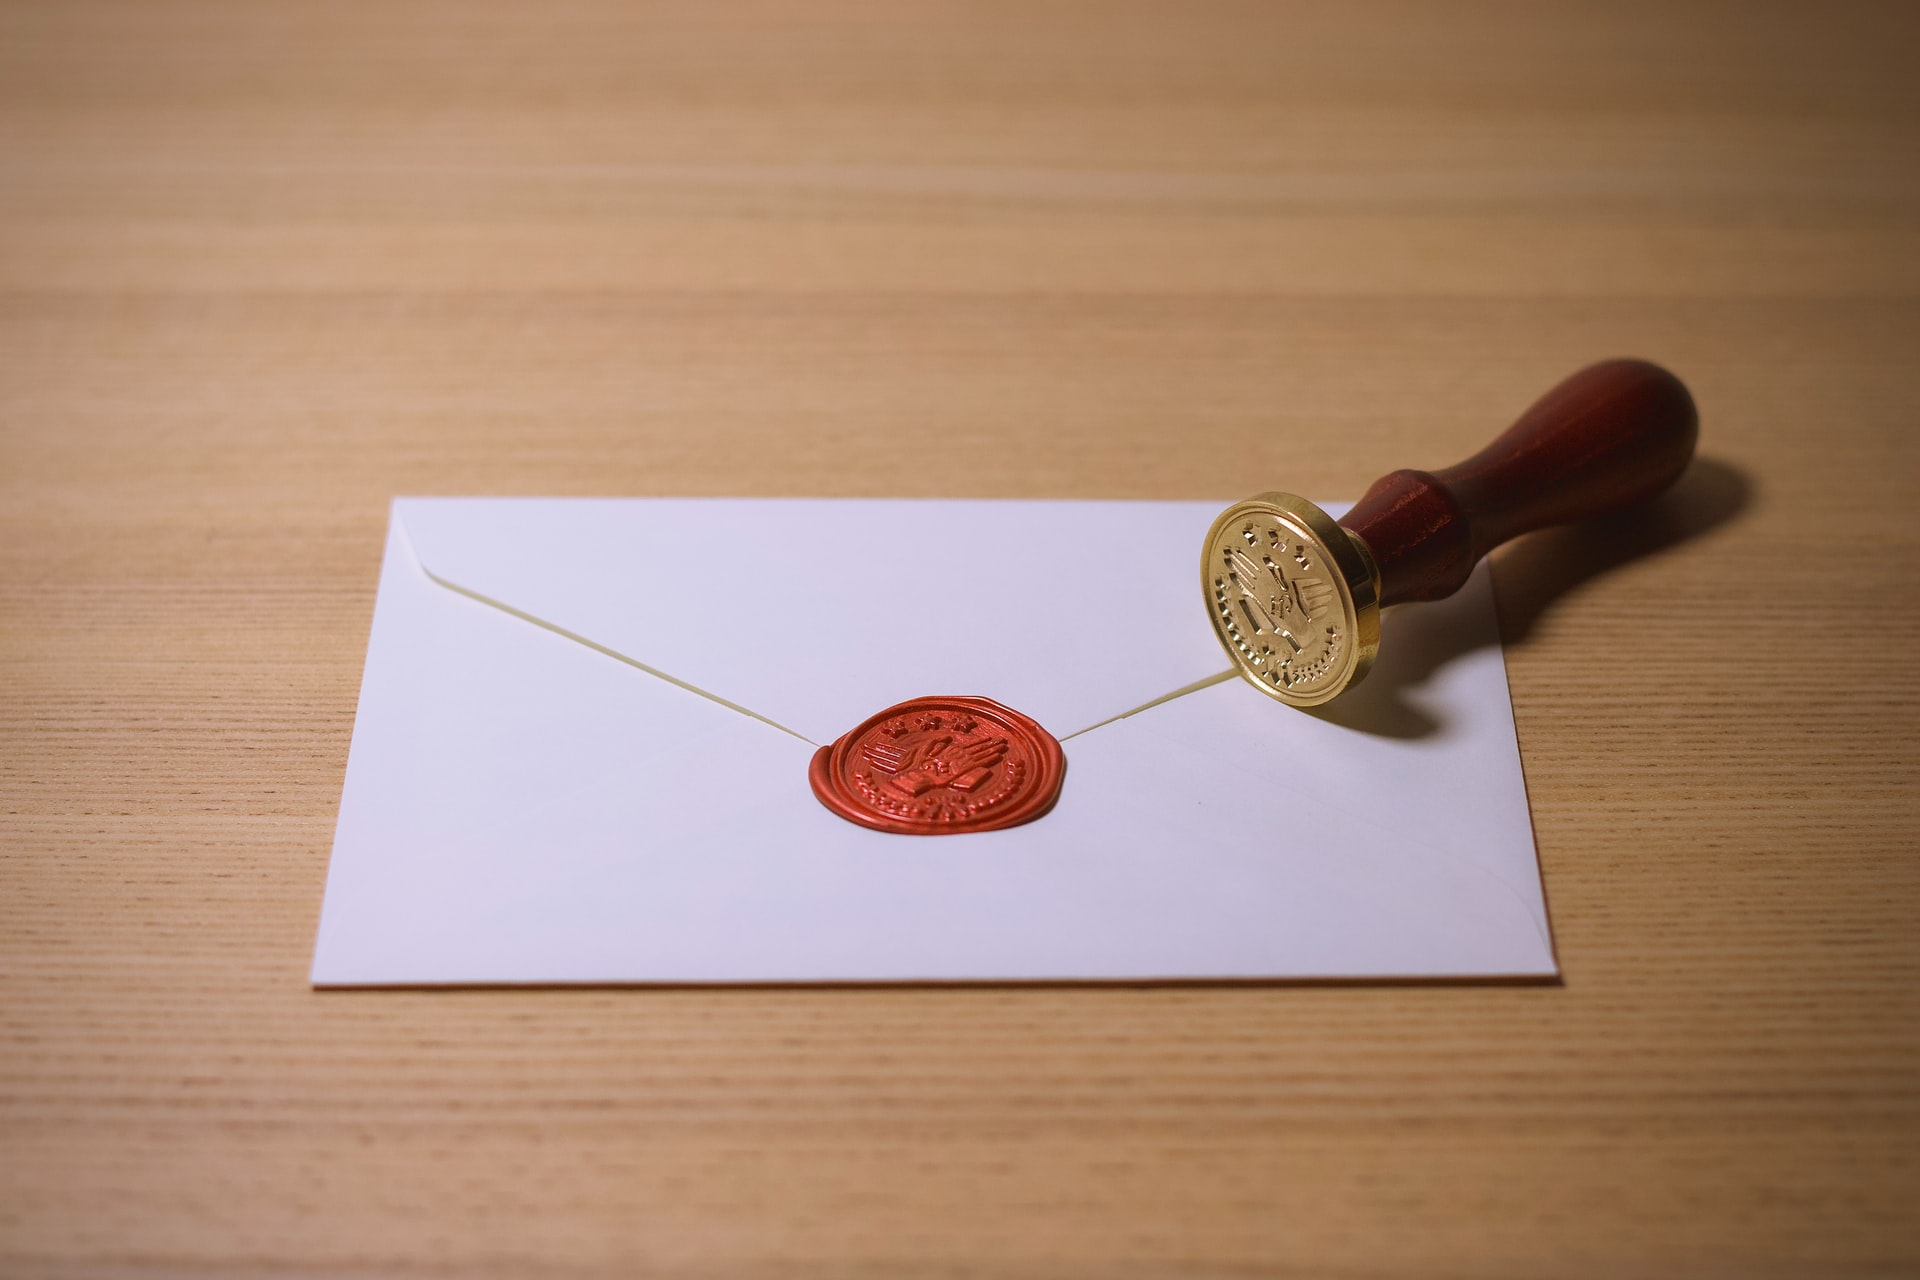 Is Sealing Wax Bad For The Environment? (What You Should Know)